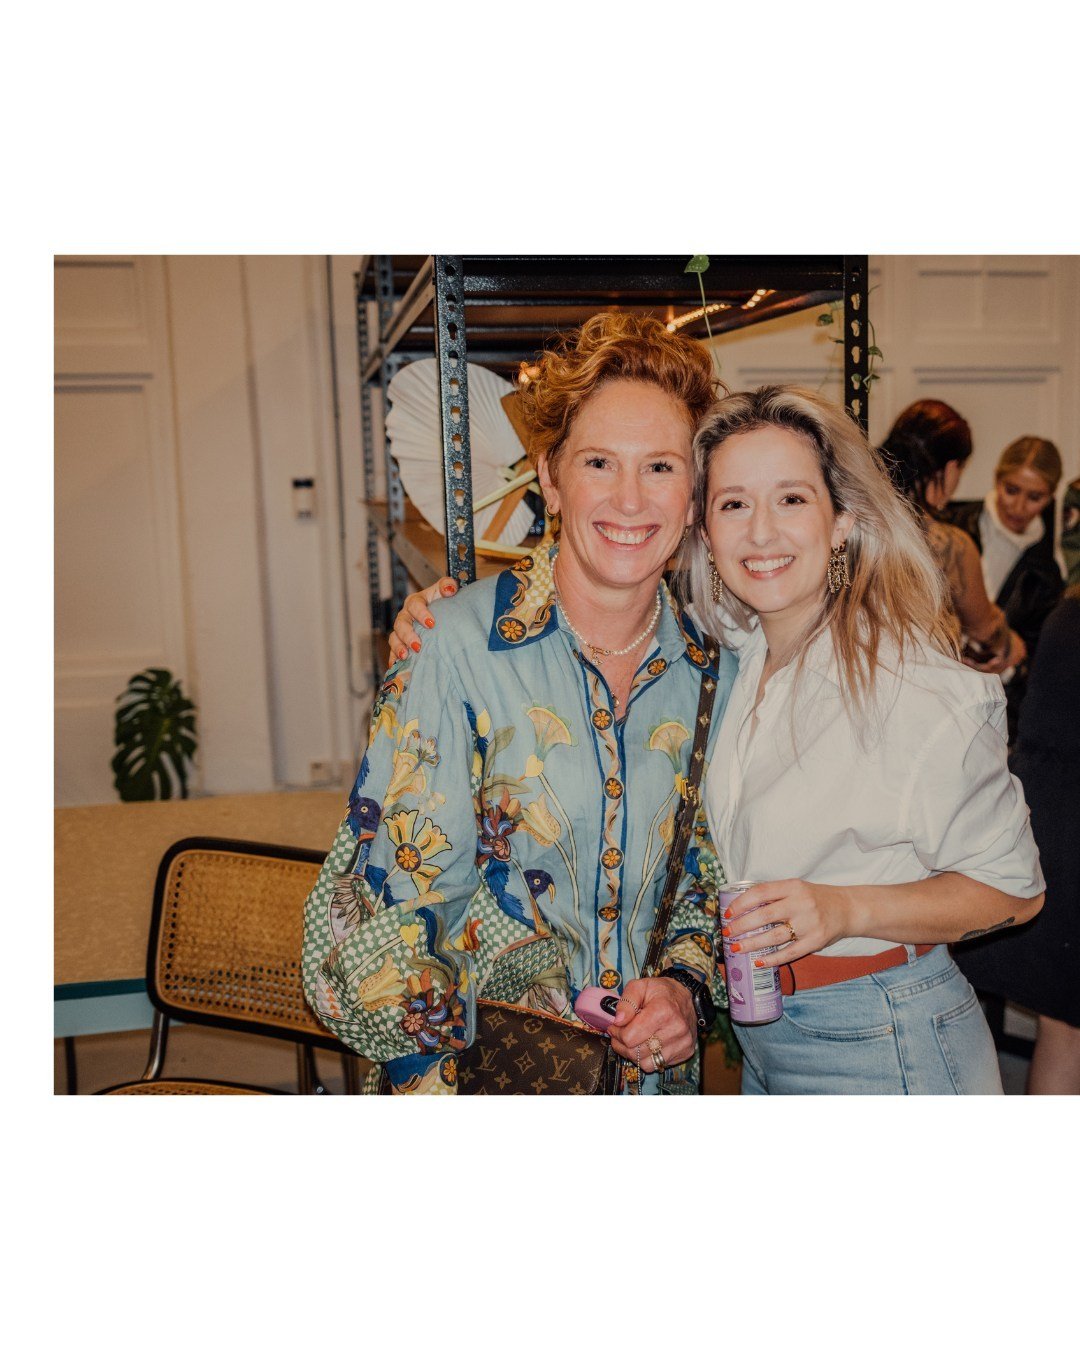 We heated up our new space with good vibes and great company at our very own Daring Digital office warming 🔥

WOW, it feels amazing to say that we have our very own office! 🥰

Thank you to all those who came along to celebrate this big milestone of